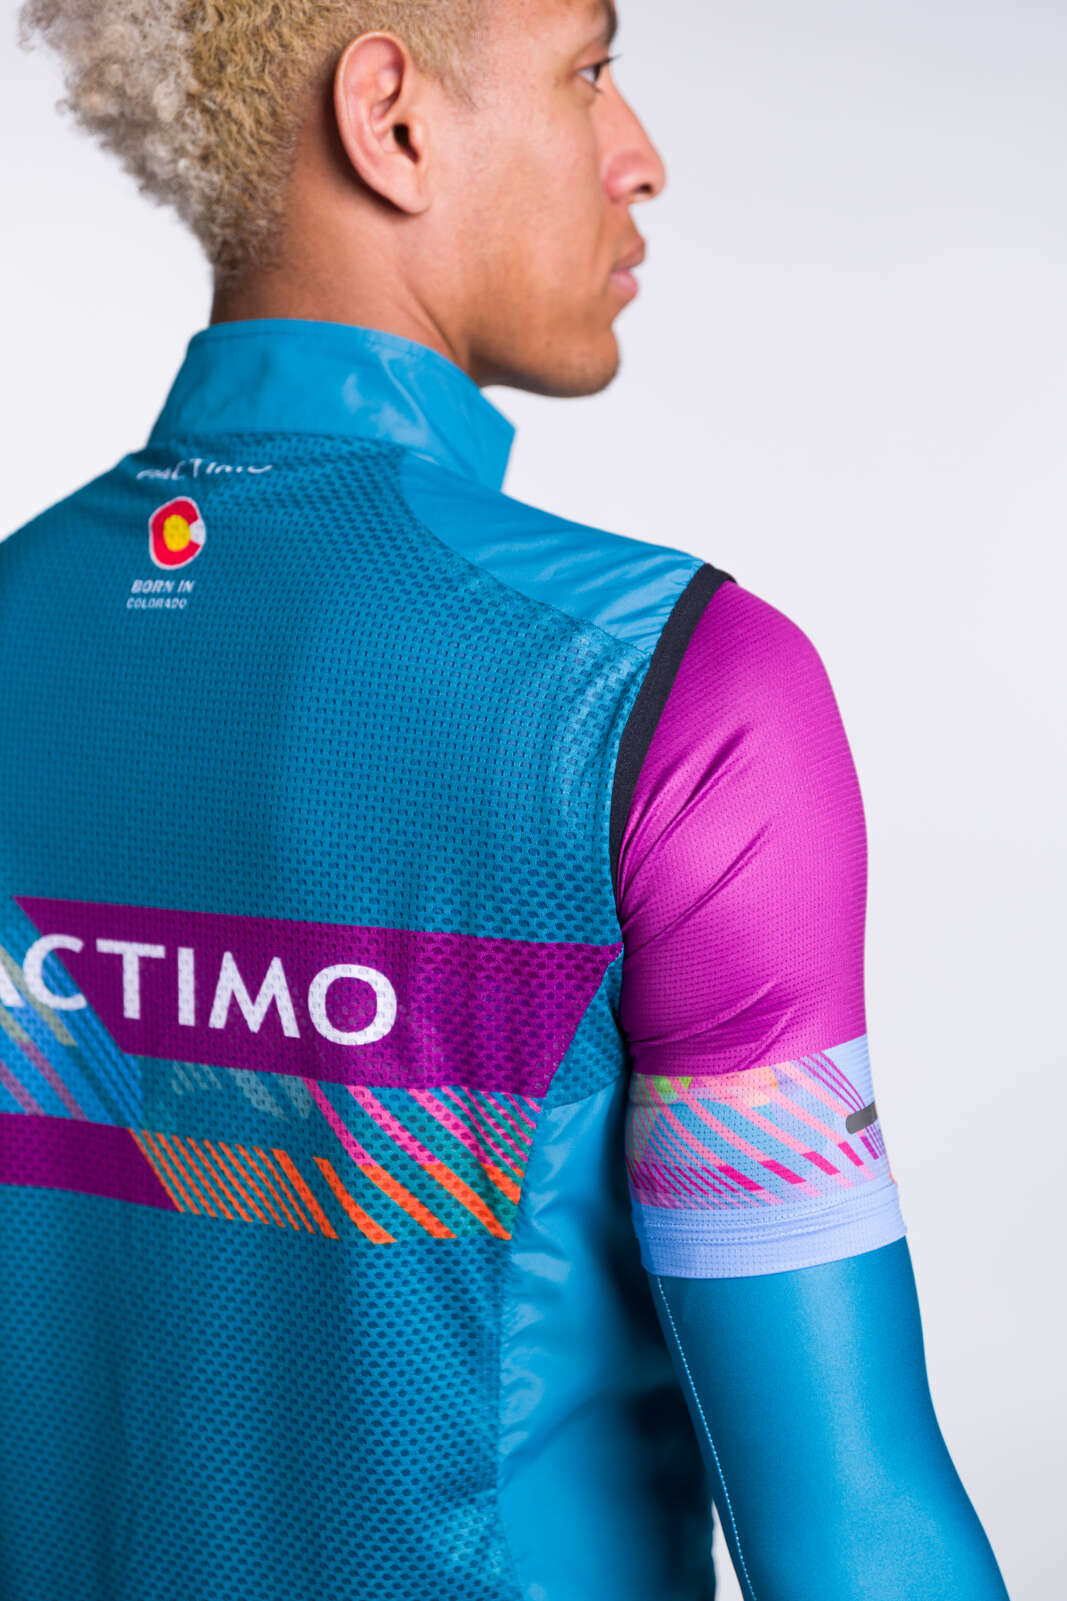 Men's Custom Cycling Wind Vest - Divide Arm Opening